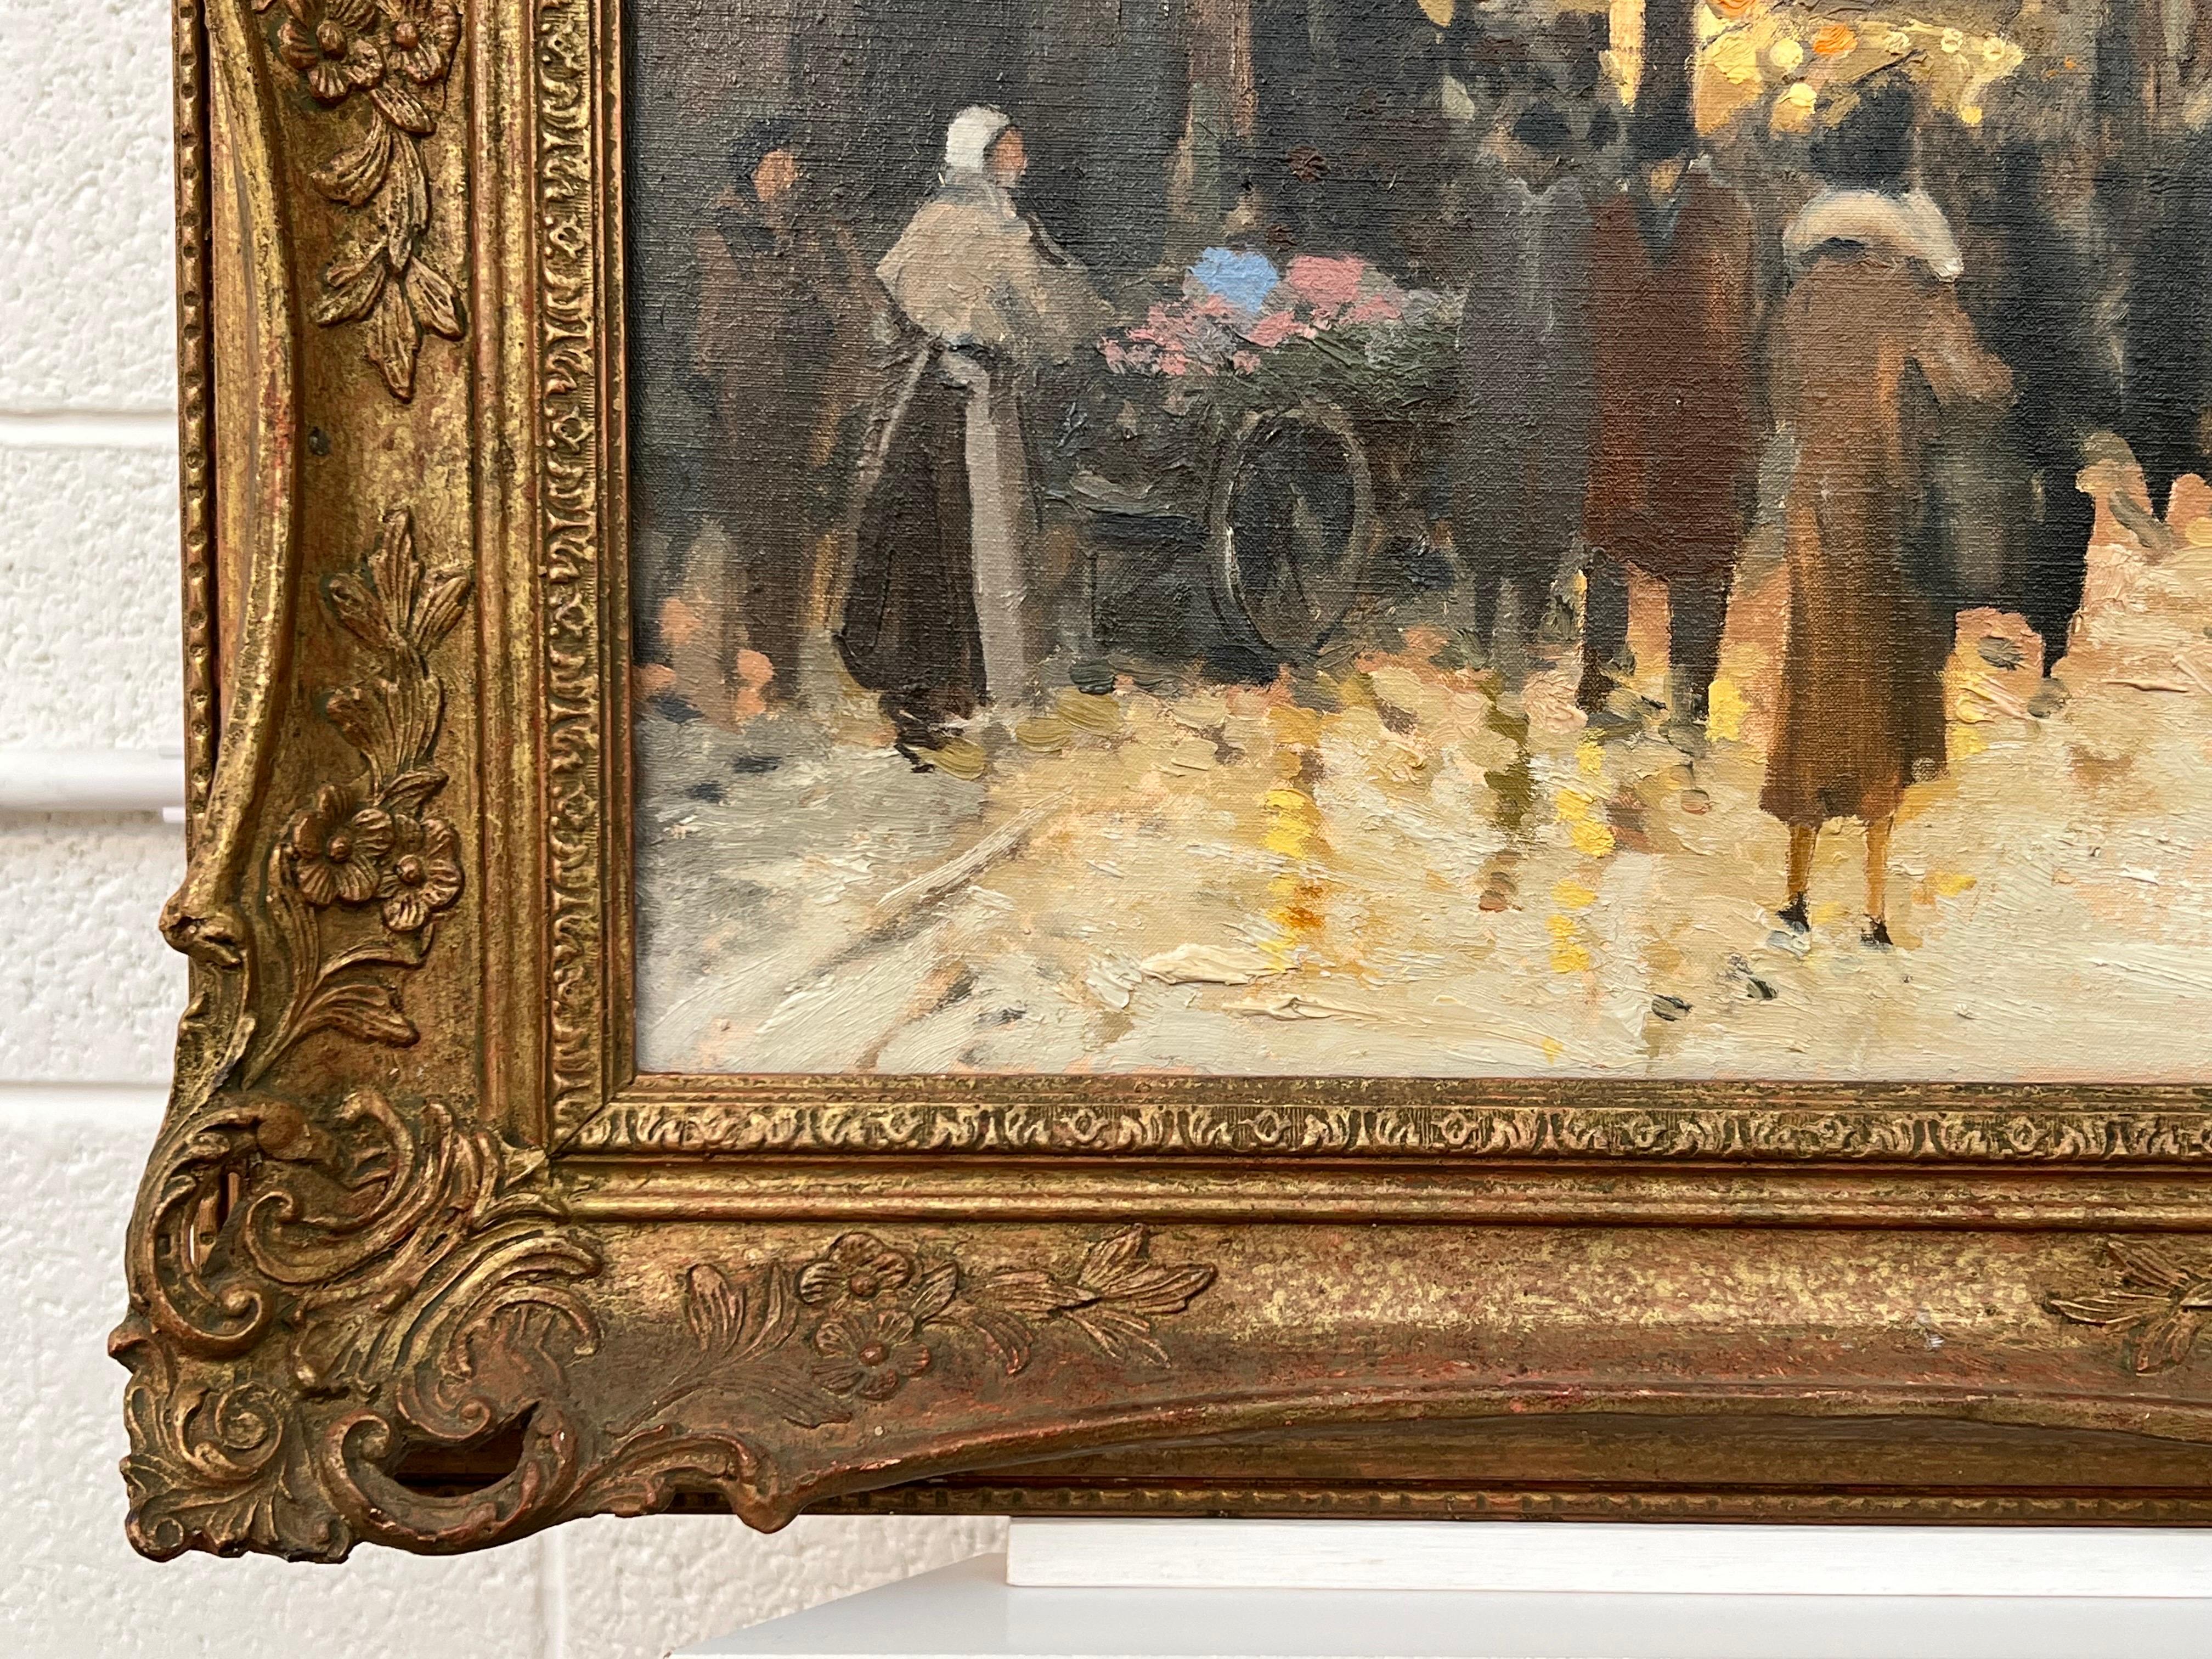 Painting of Figures at a Parisian Market at Wintertime in the late 19th Century, by M Stanley. This is a signed original, oil on canvas, in good condition. Presented in an ornate vintage frame. 

Art measures 36 x 24 inches 
Frame measures 44 x 32